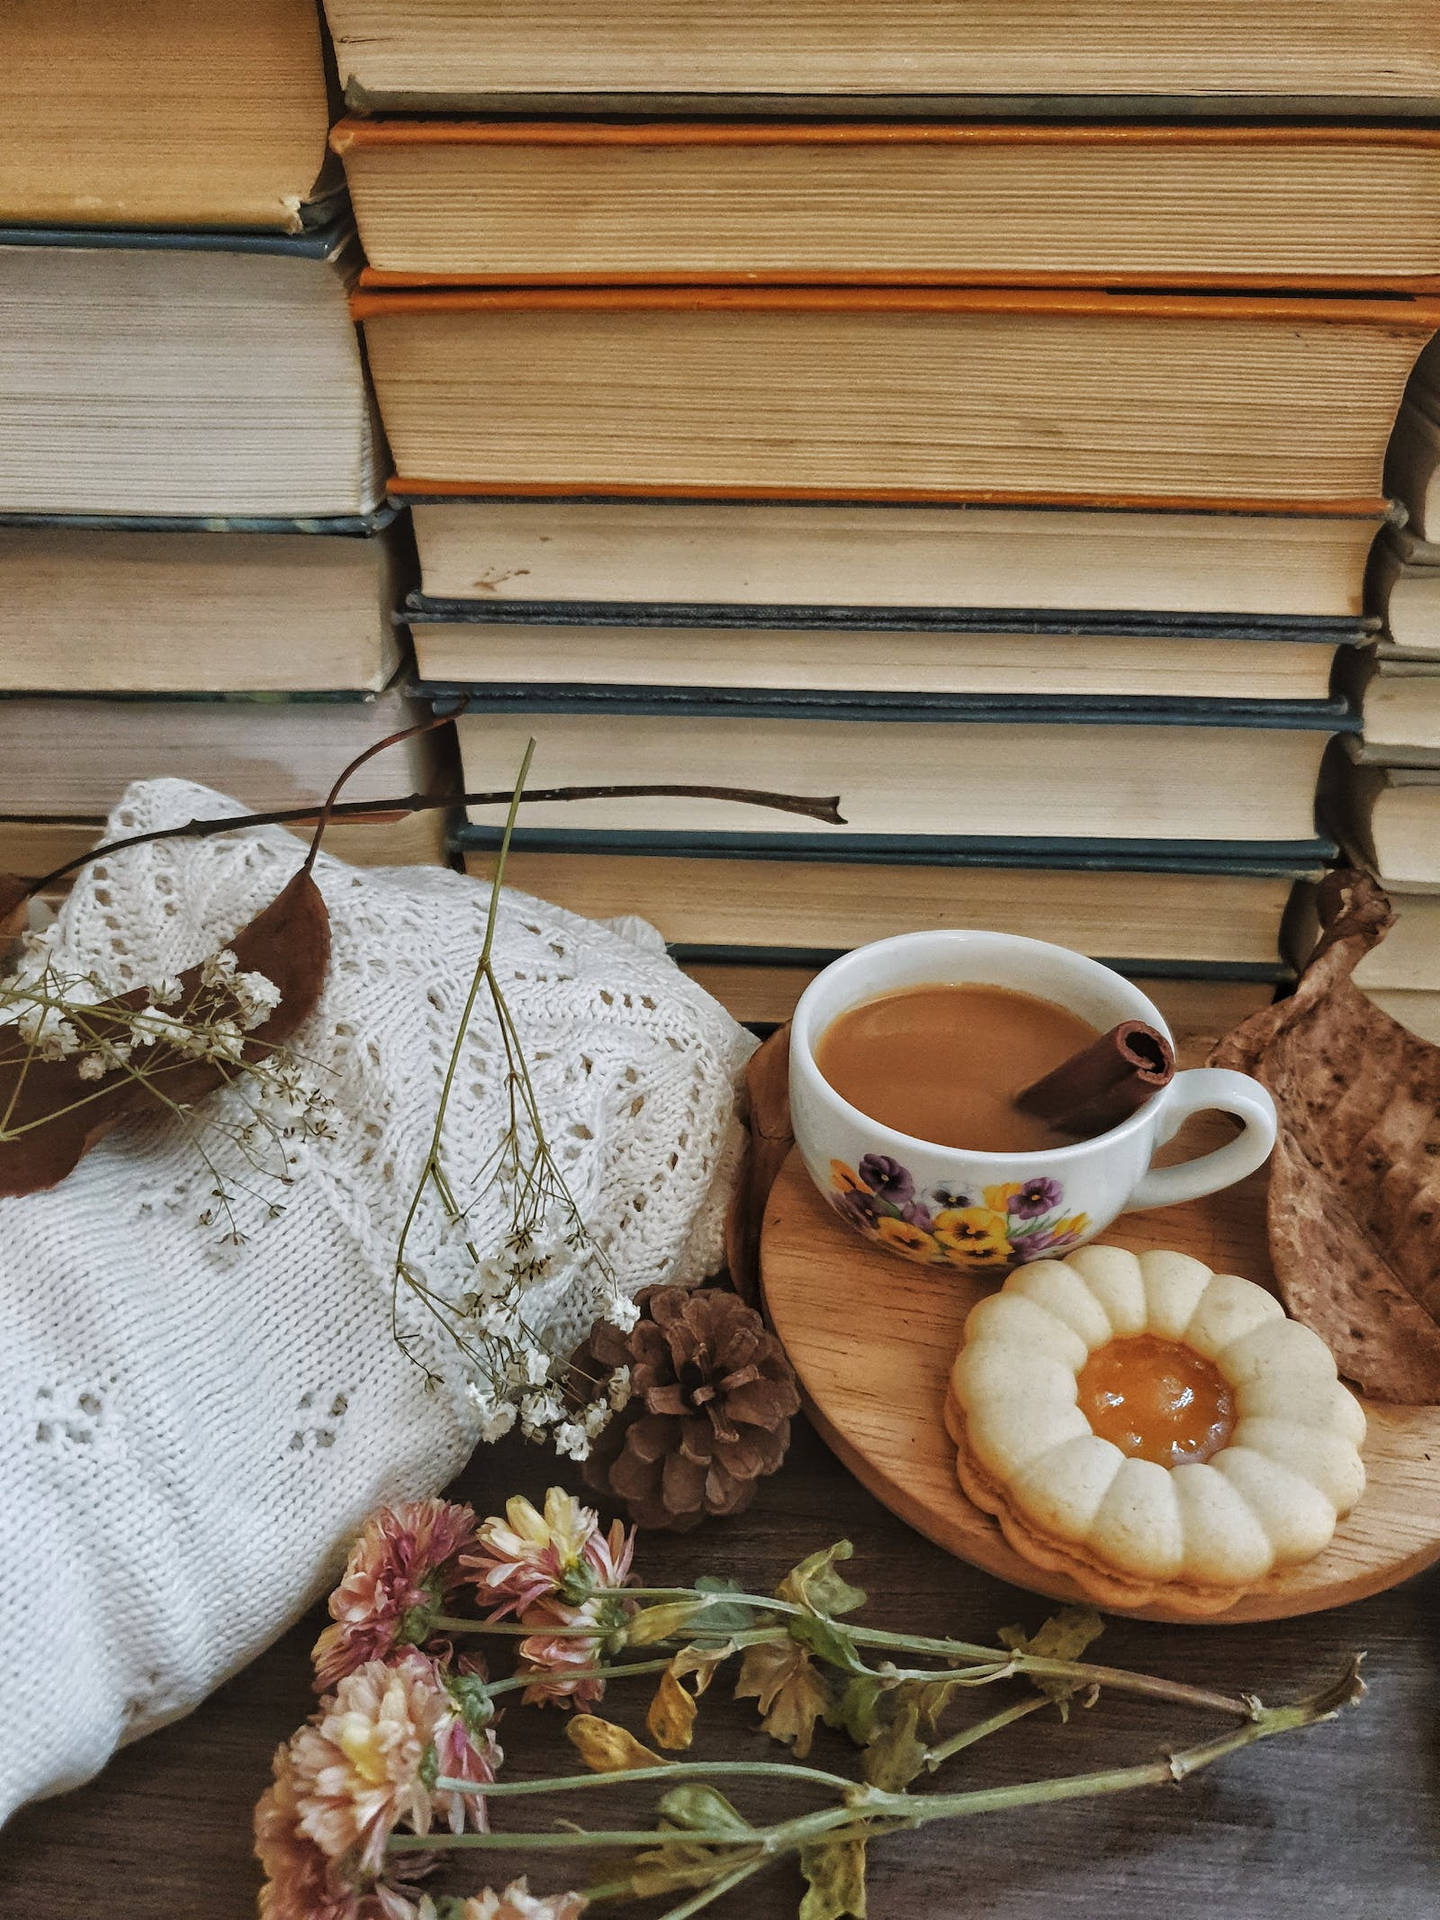 Rustic Fall Tea Time Background